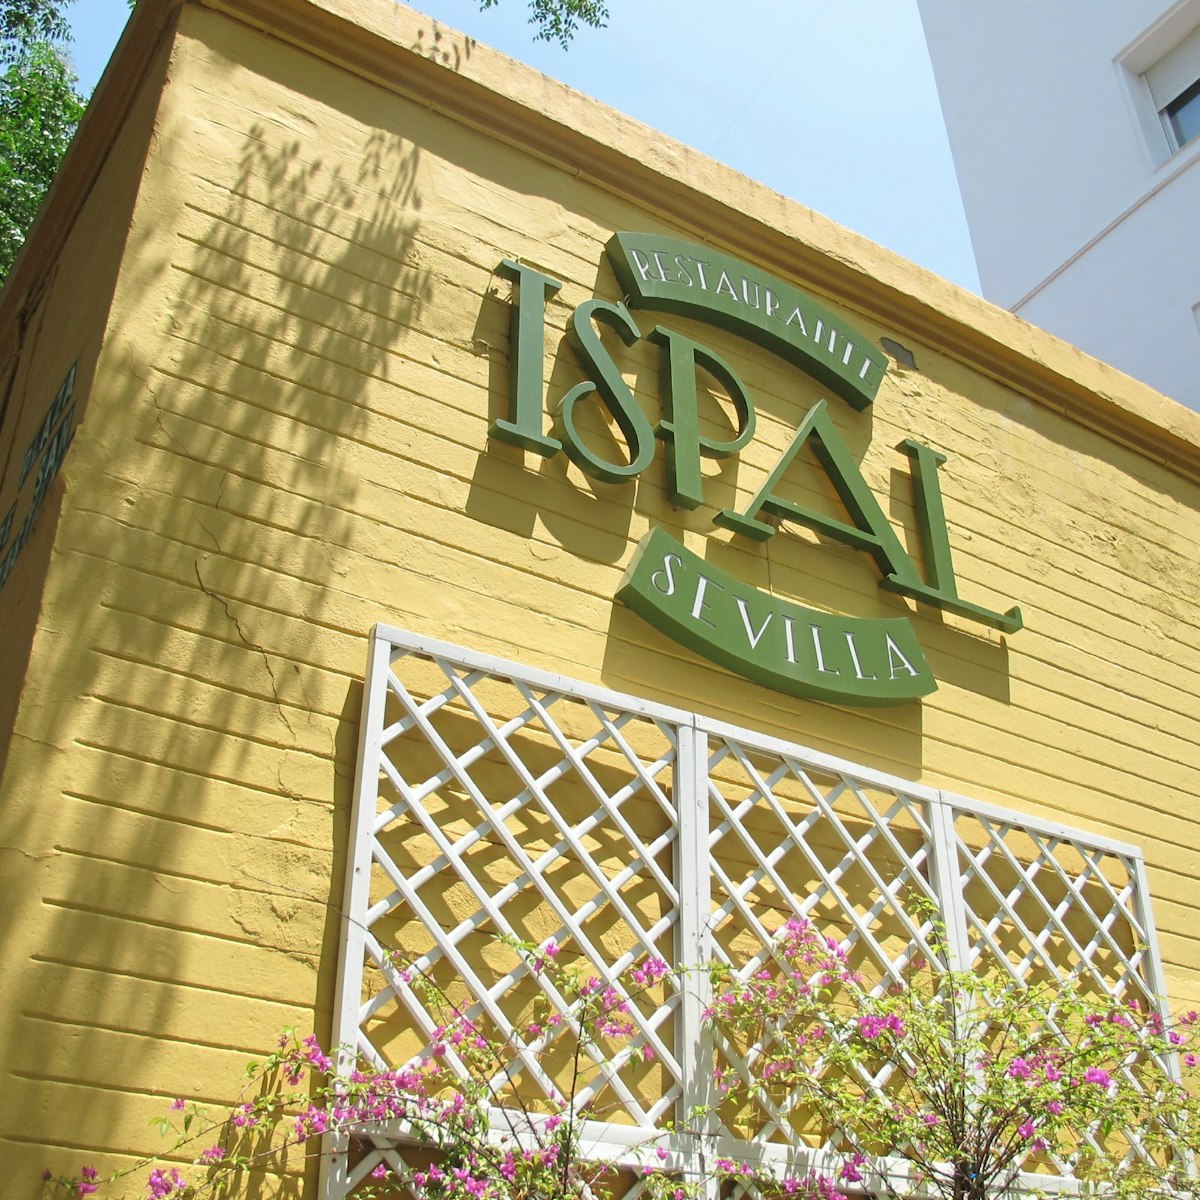 Ispal restaurant yellow wall with sign.